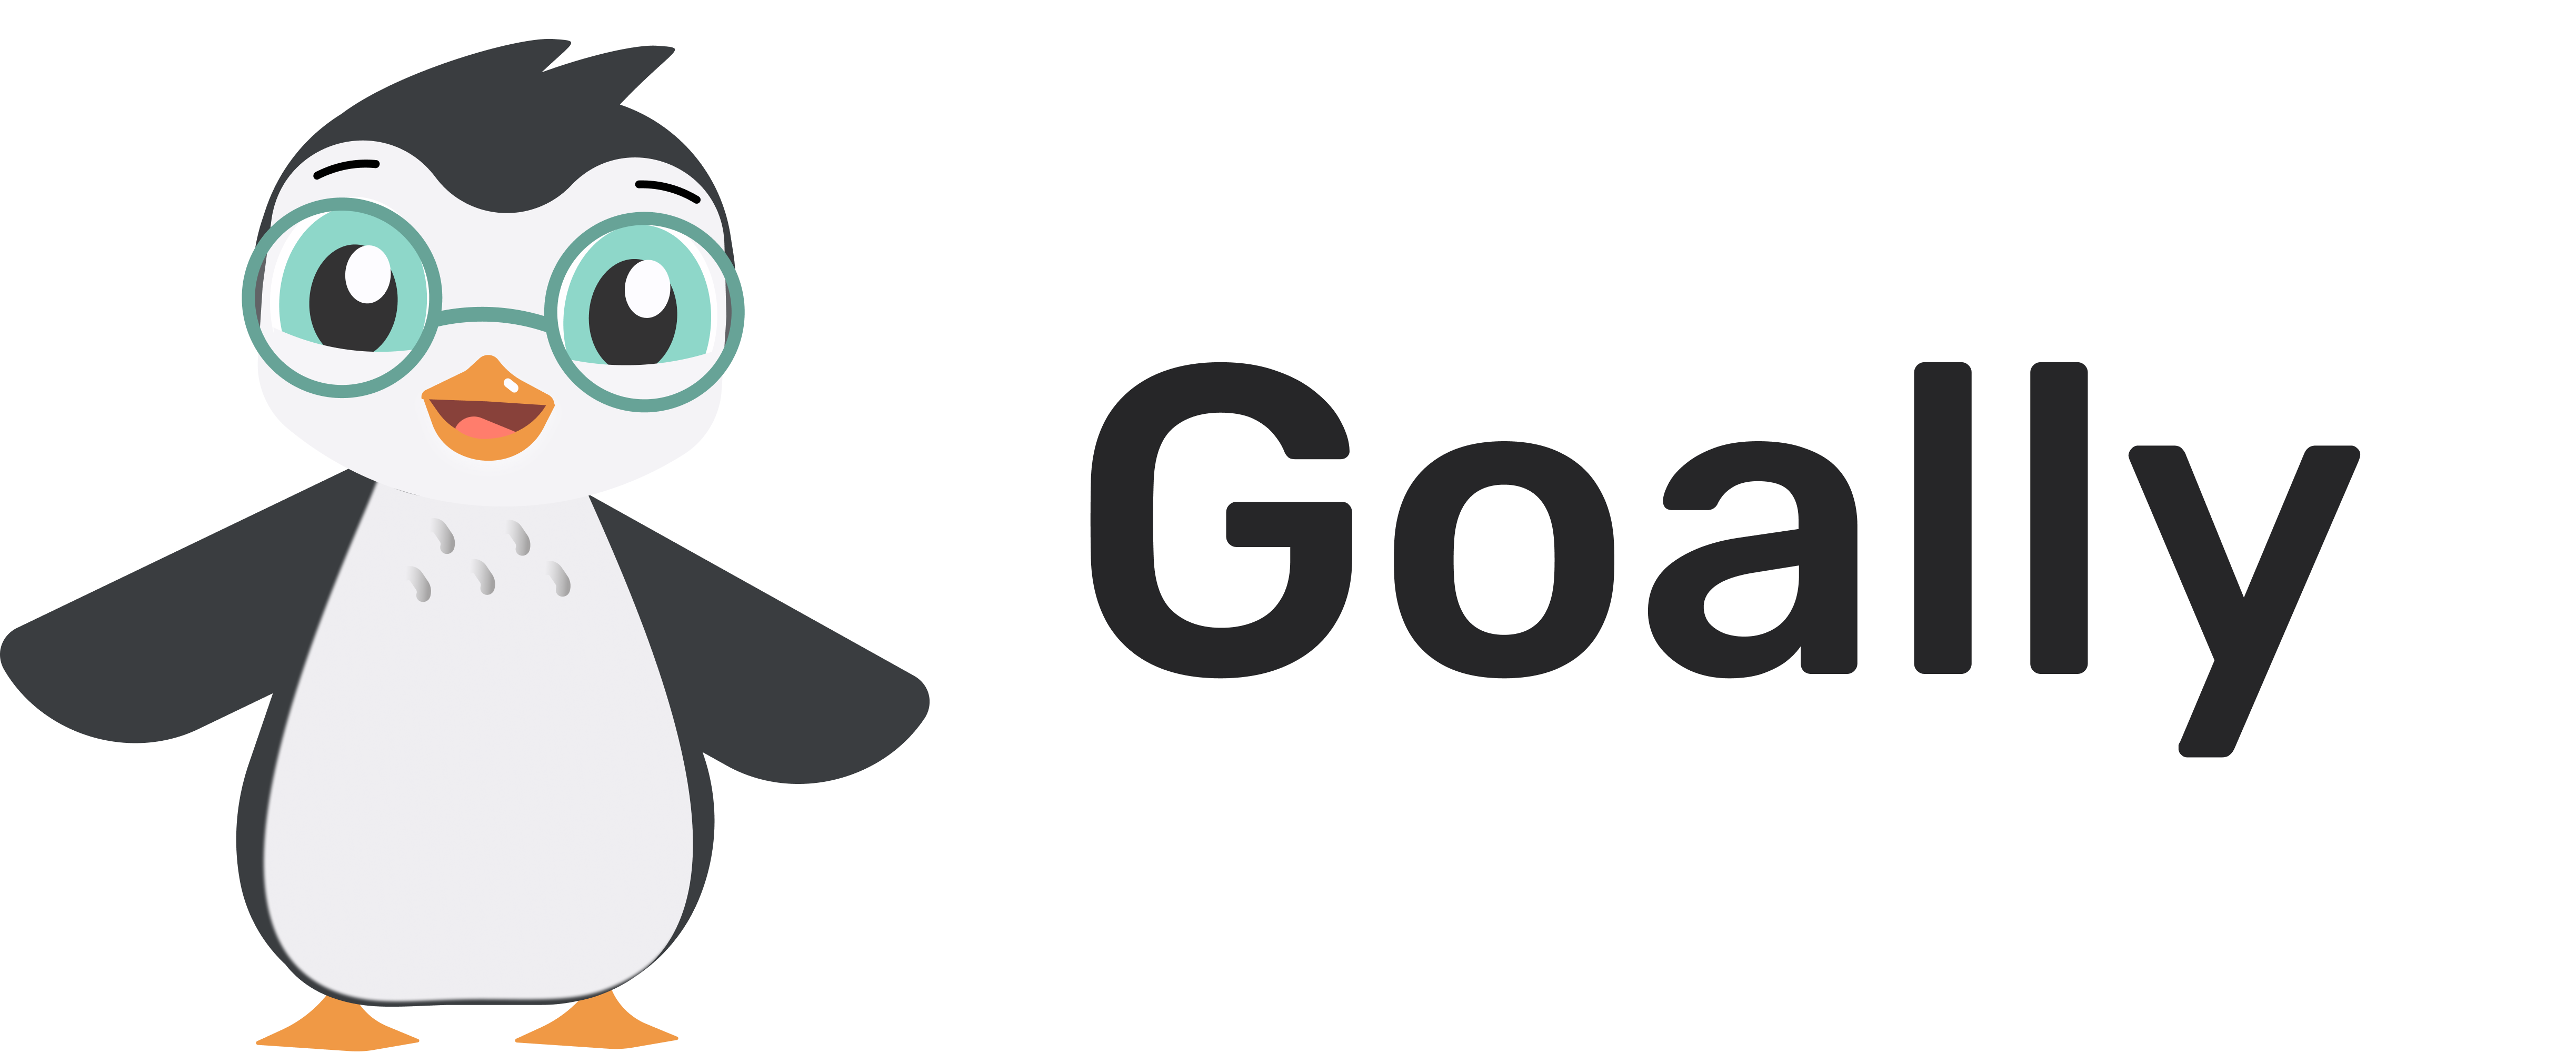 Goally logo. On the left is a cartoon penguin with glasses and blue eyes smiling. To the right is the company name "Goally" in black letters